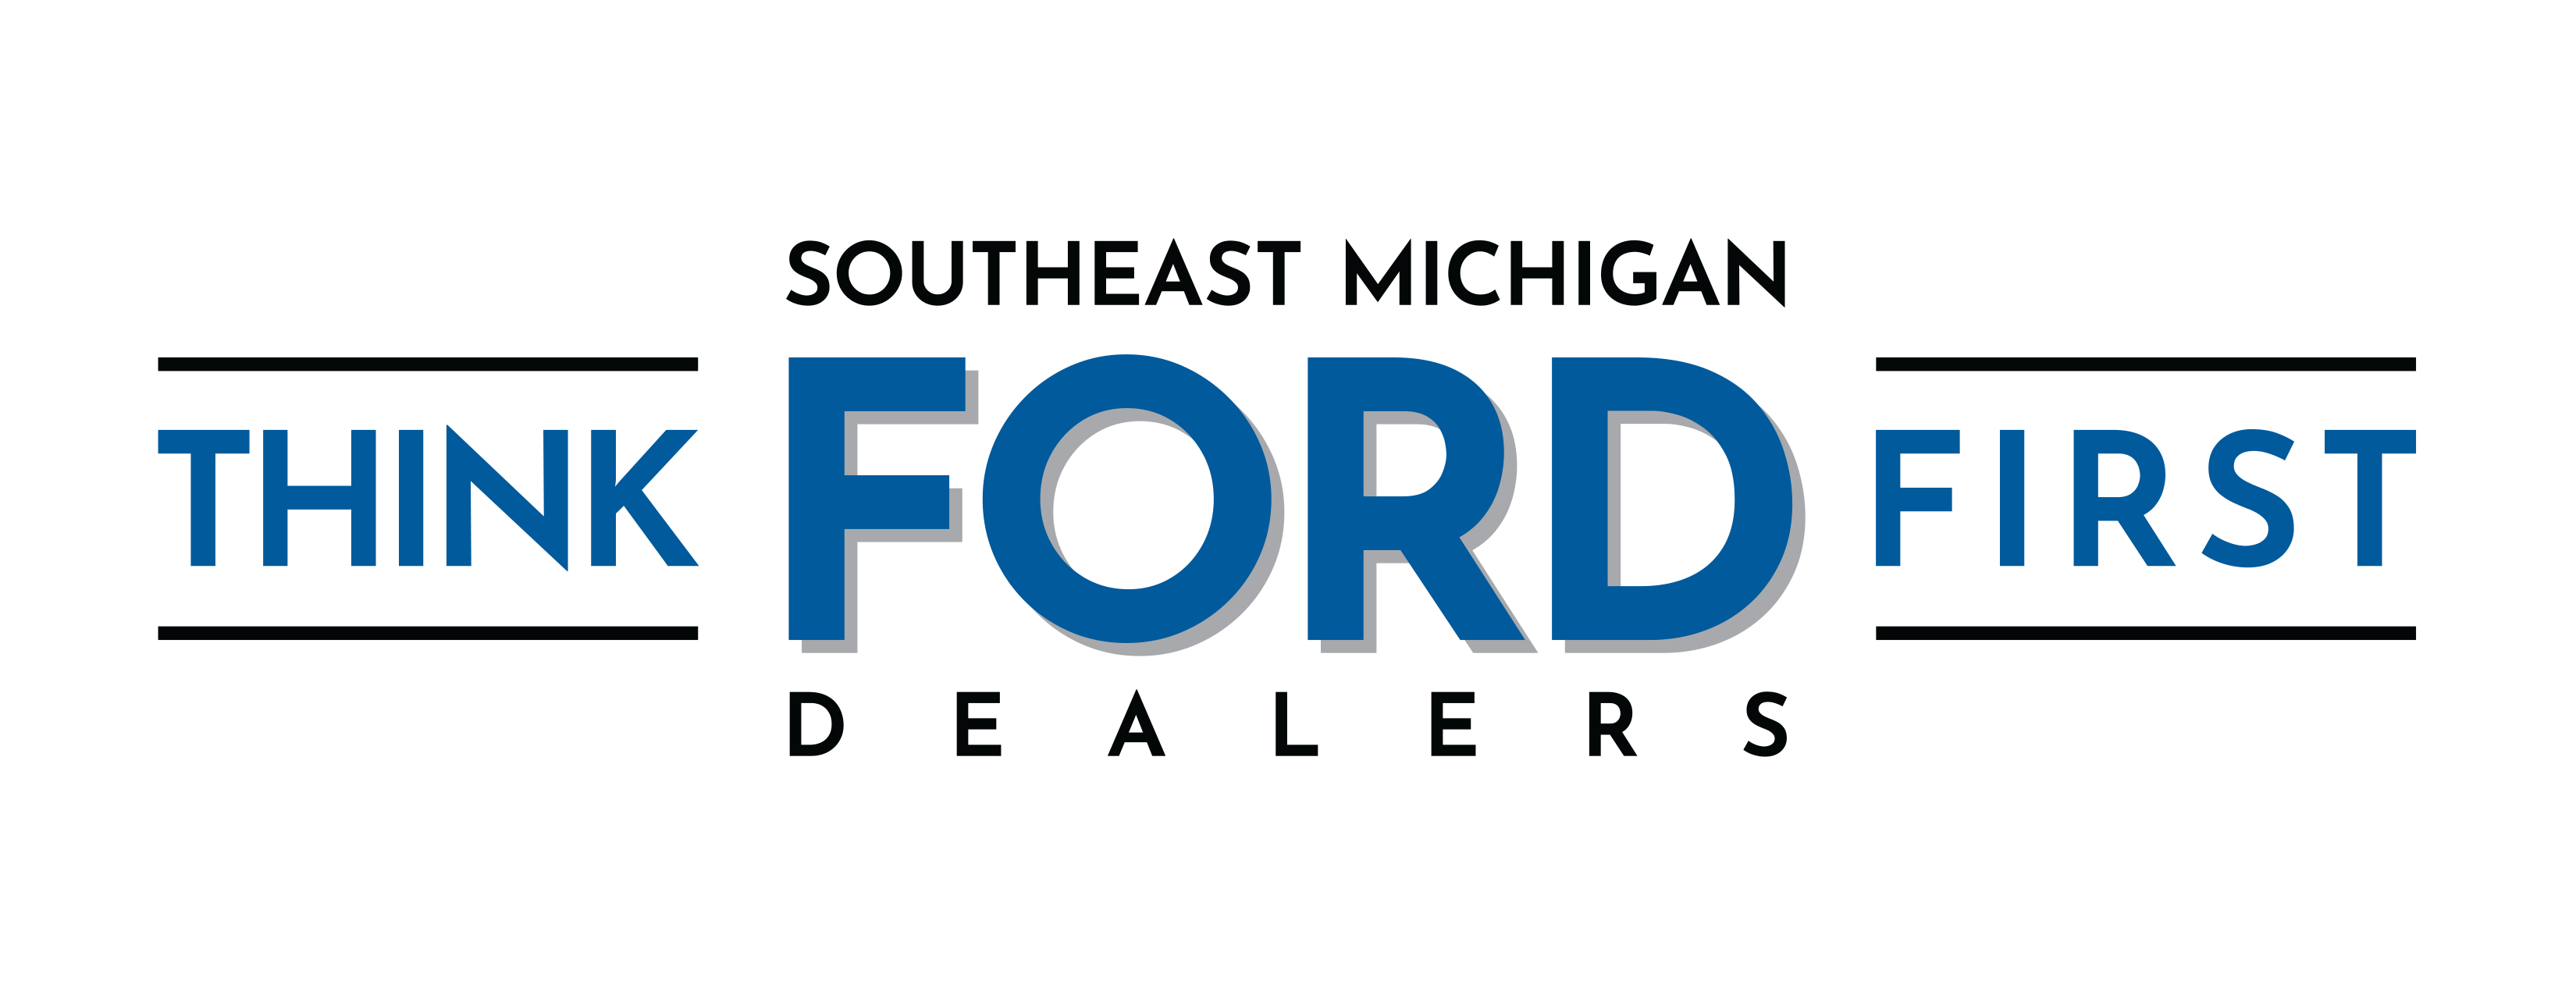 Southeast Michigan Ford Dealers